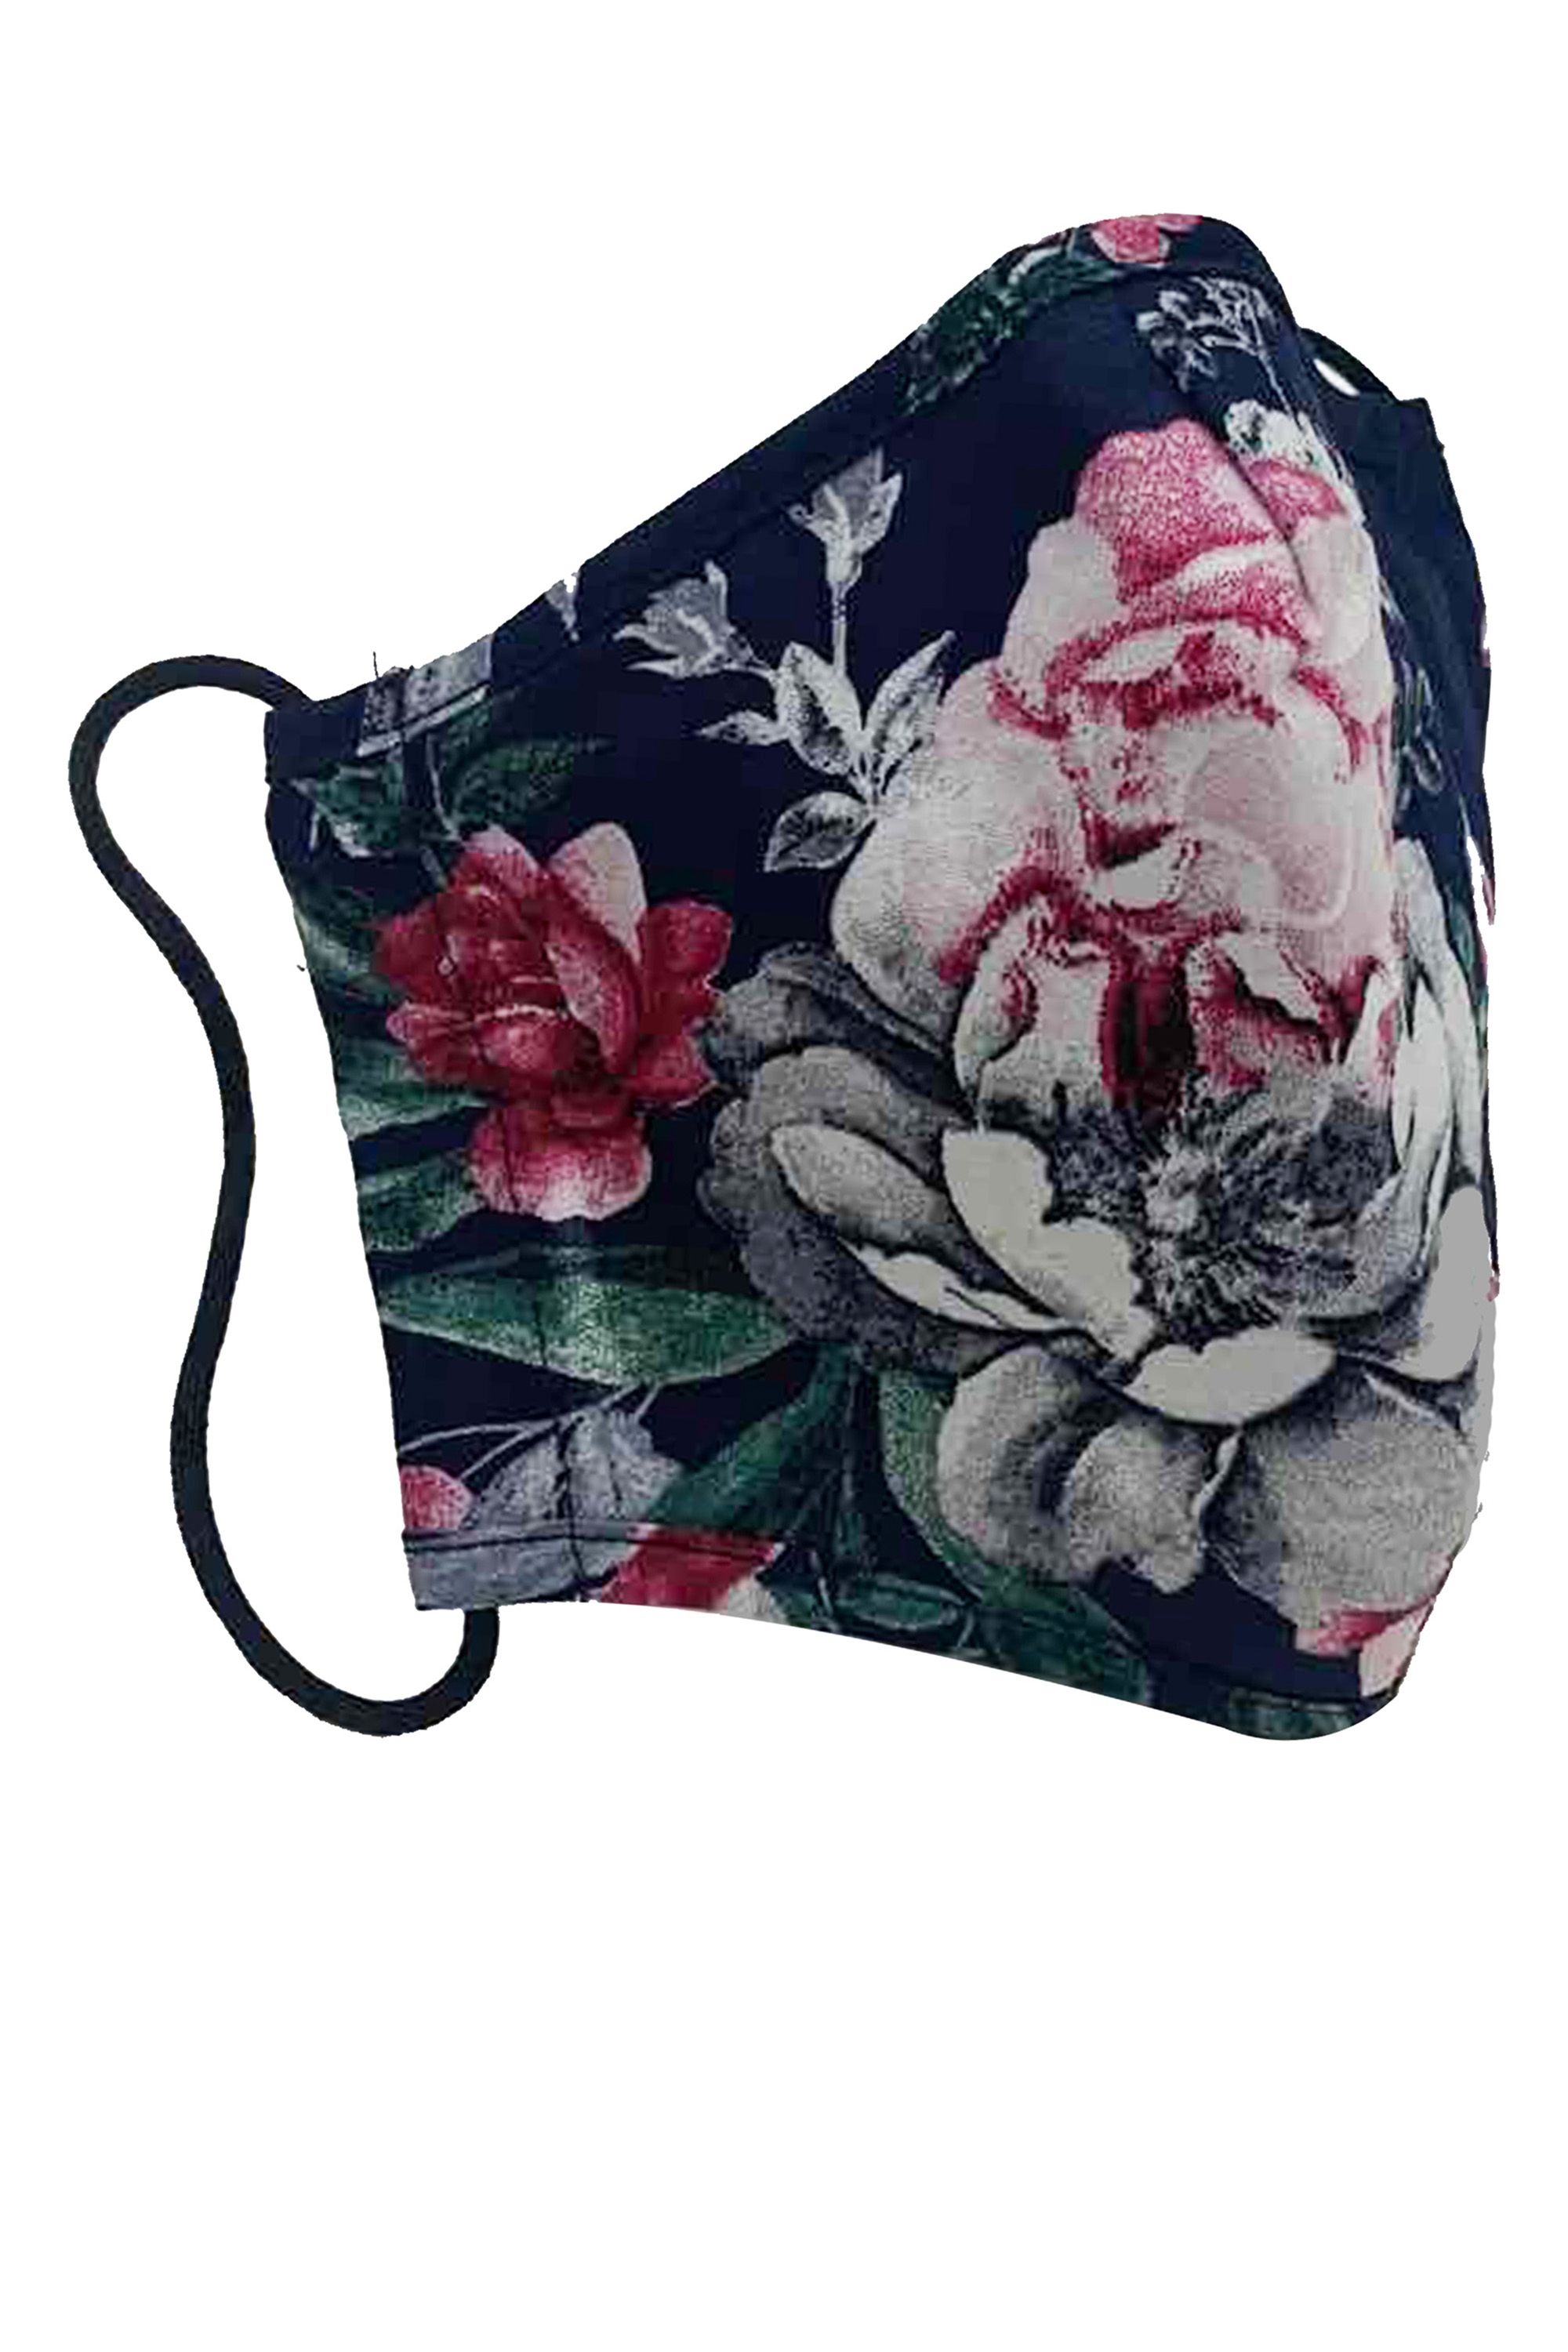 With a fresh print and comfortable cotton fabric, this Rose Floral Face Covering is easily washable and soft on your face. It's made from the end of our fabric rolls, so it's sustainable and kind to the planet.Please remember it is a non-medical mask and not PPE. Wash your hands before and after putting on the covering. One Poundfrom each covering is donated to Sufra, a charity that supports and provides food for people in extreme poverty.  100% Cotton, Lining:100% Cotton